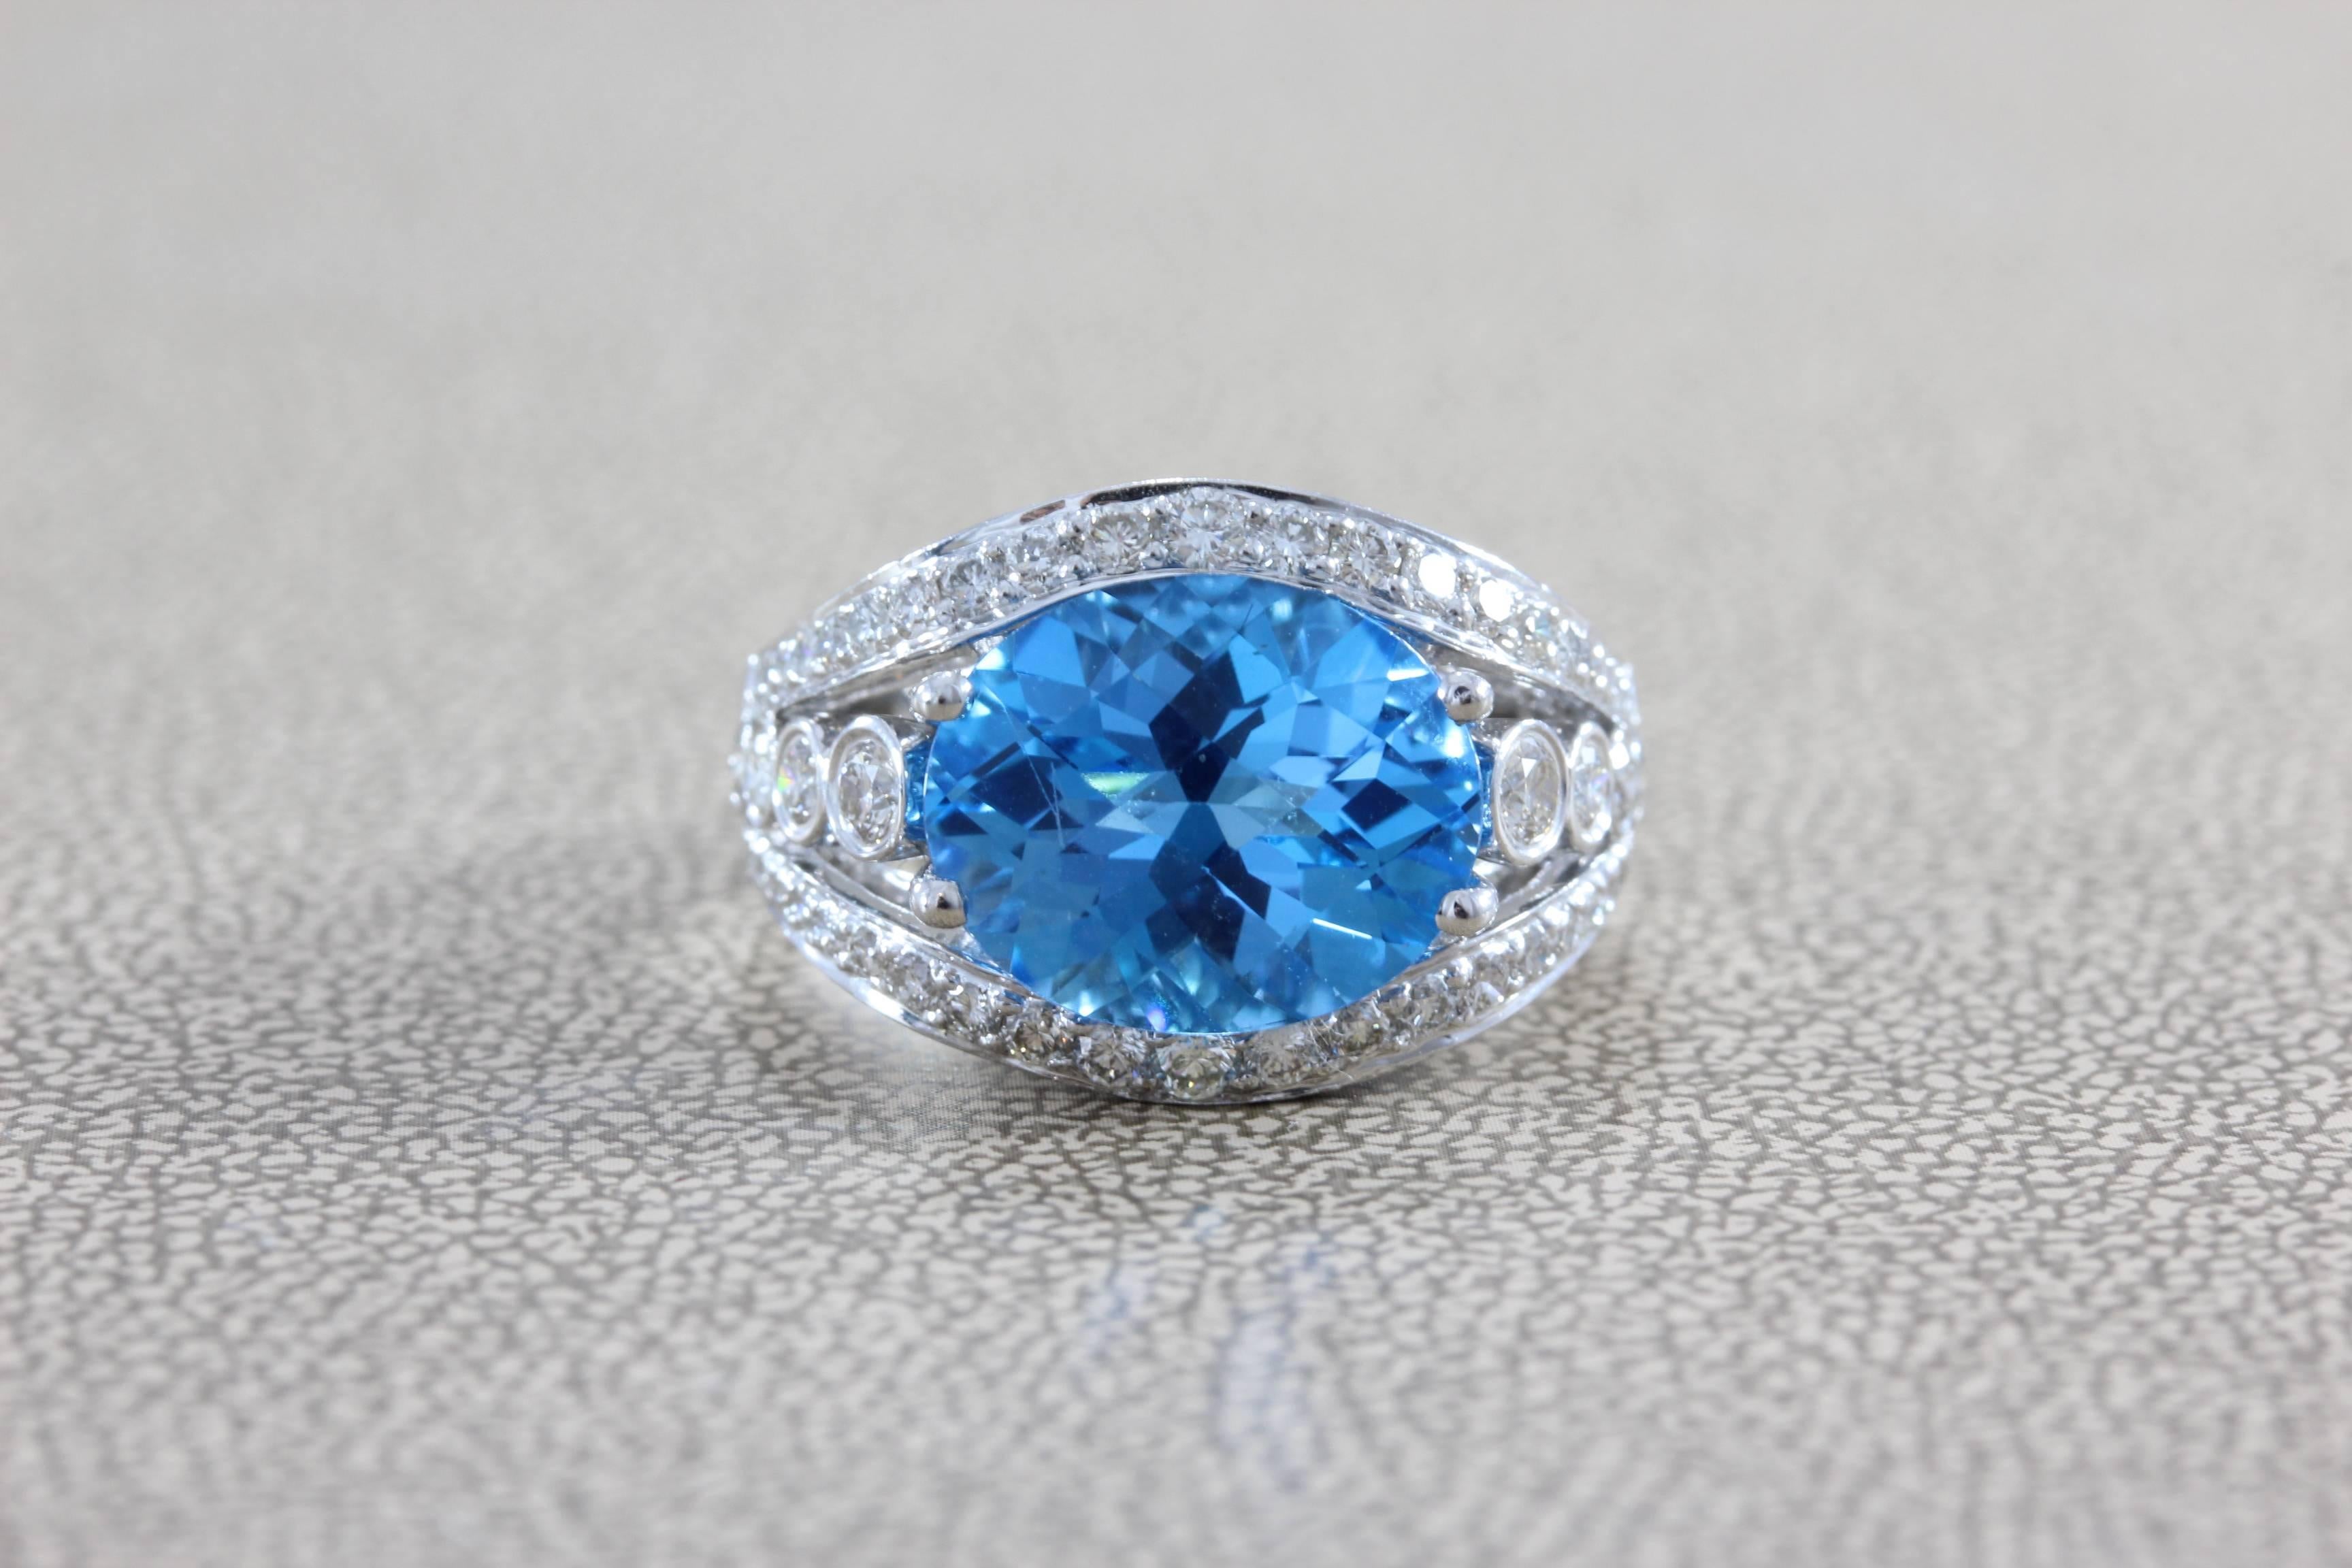 A majestic 5.85 carat ocean blue topaz is set in 18K white gold.  The oval cut topaz has a modern checkerboard cut top.  1.17 carats of VS clarity diamonds surround the majestic topaz in a special design.  

Ring size 6 ½
